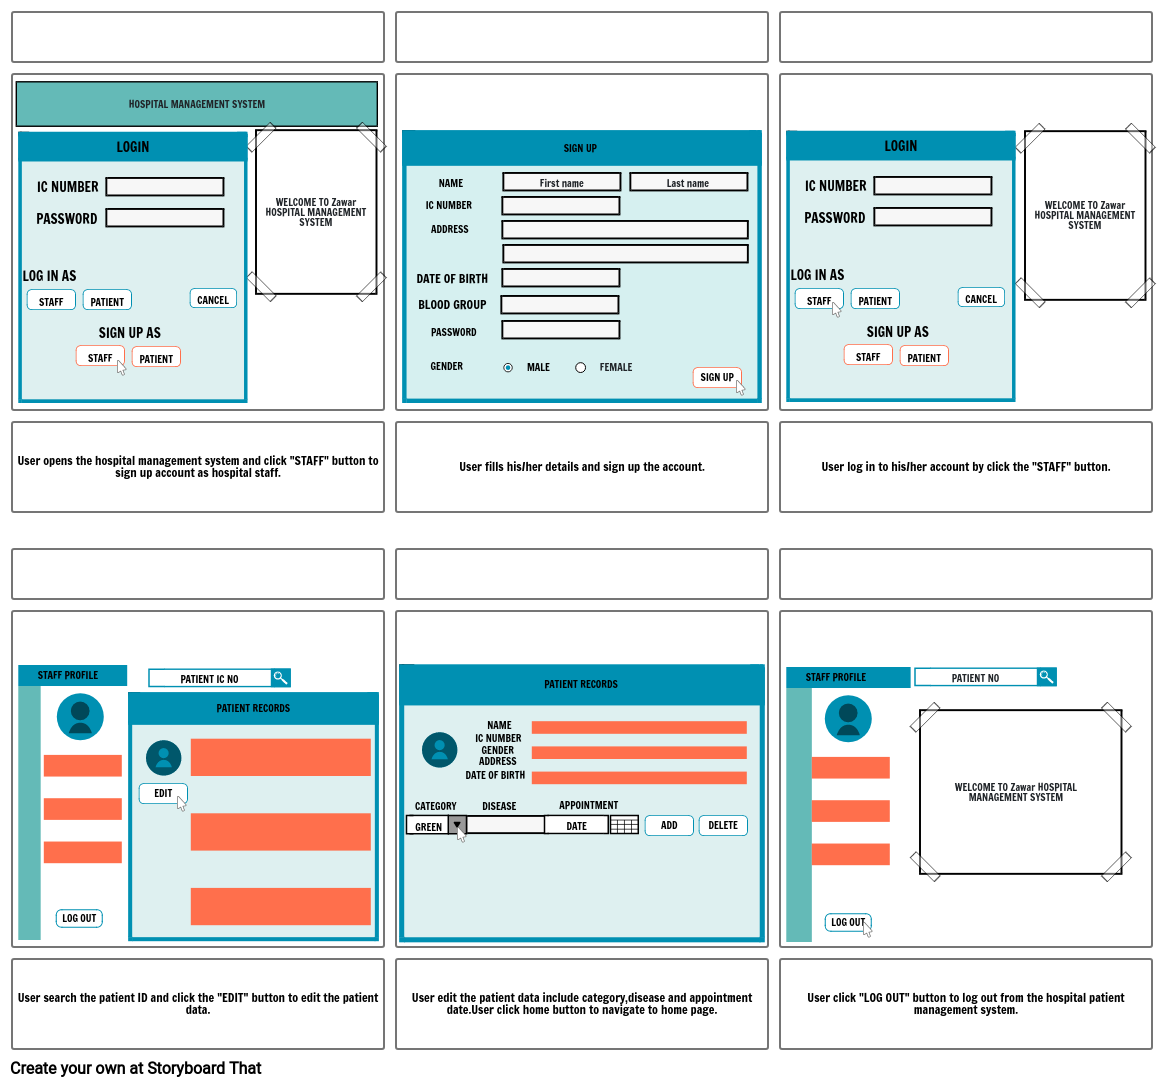 hospital-management-system-storyboard-by-c7487177